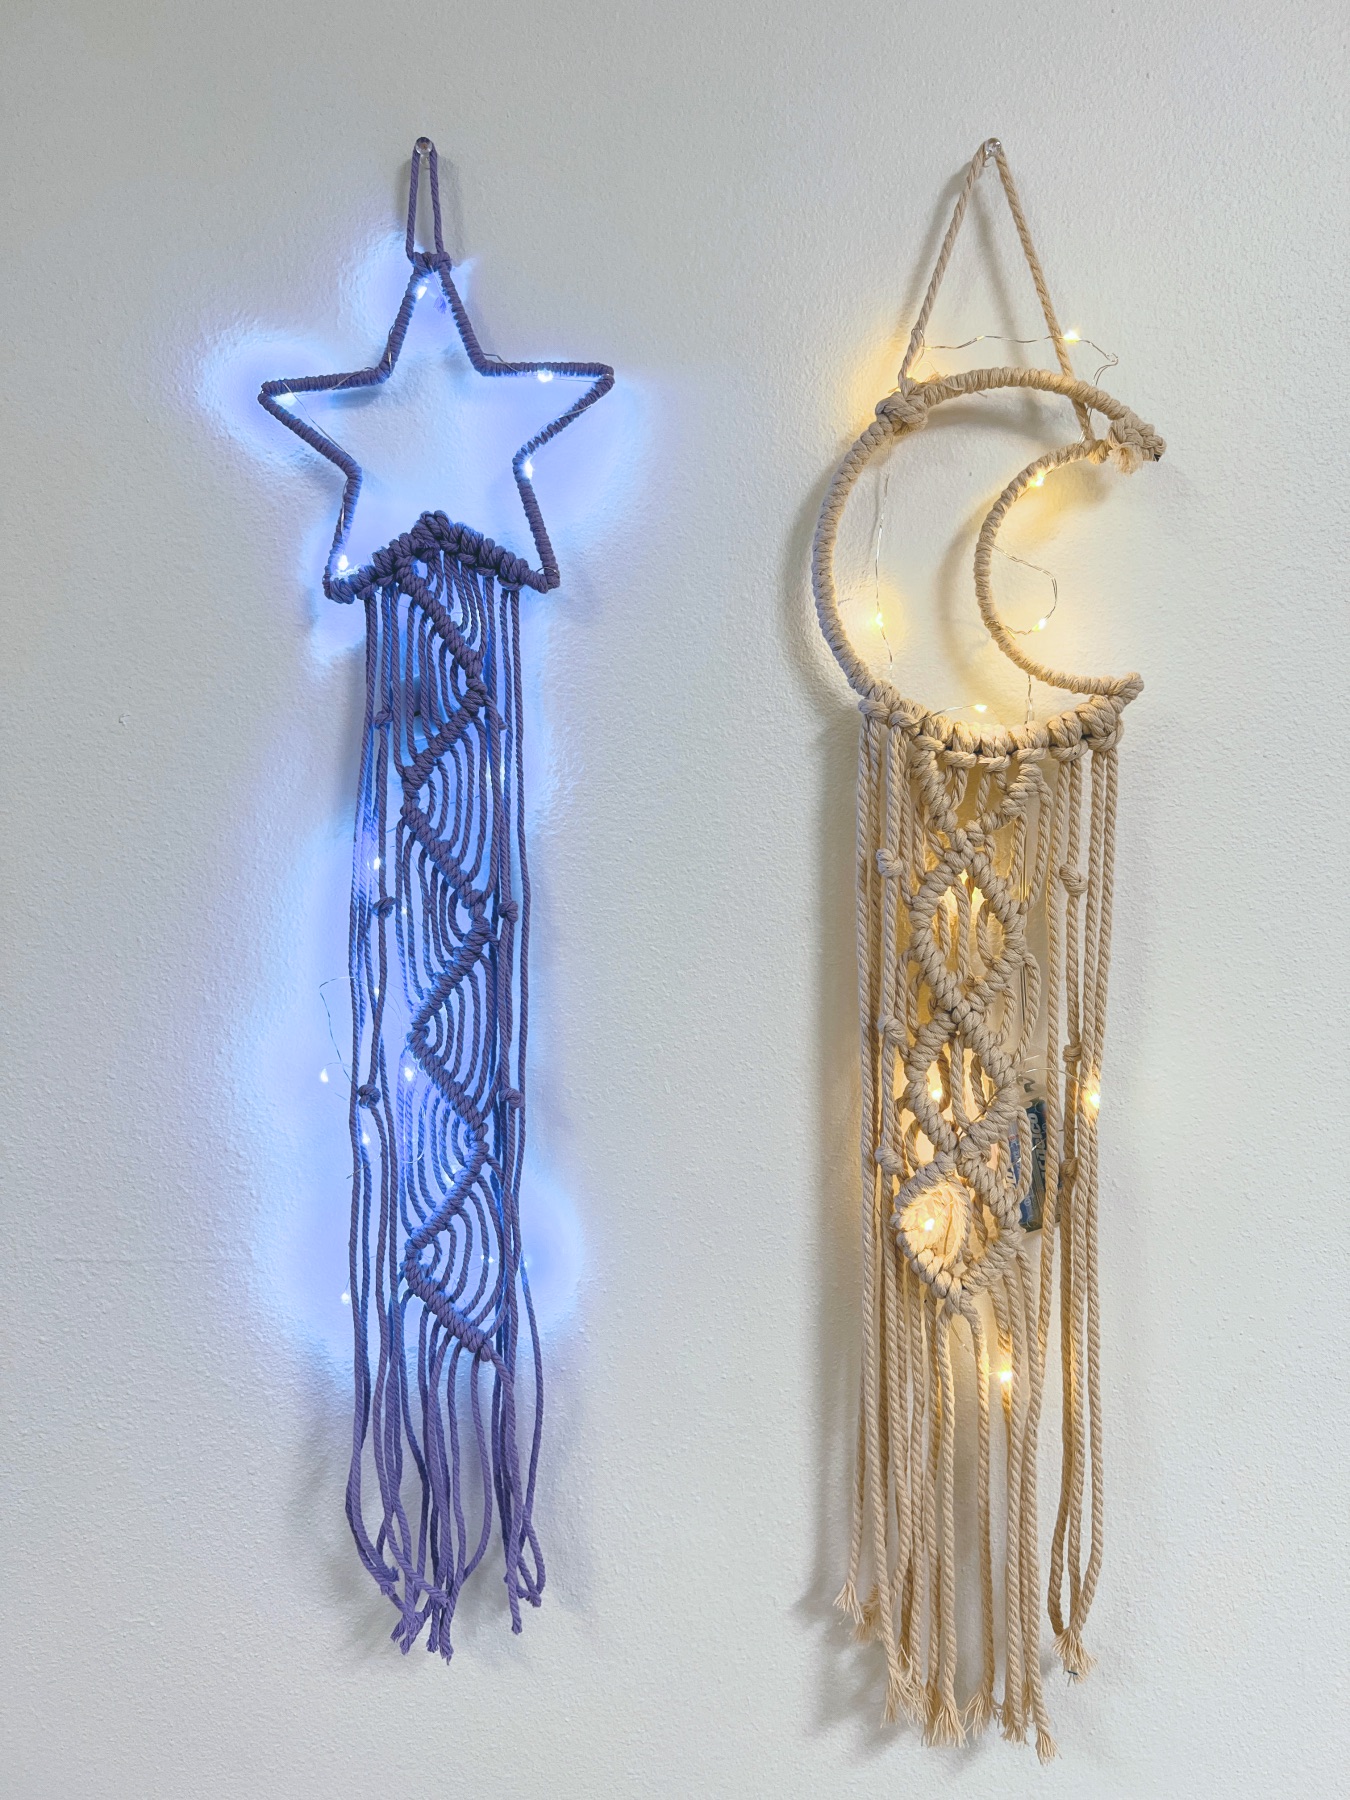 finished moon and star macrame wall hangings